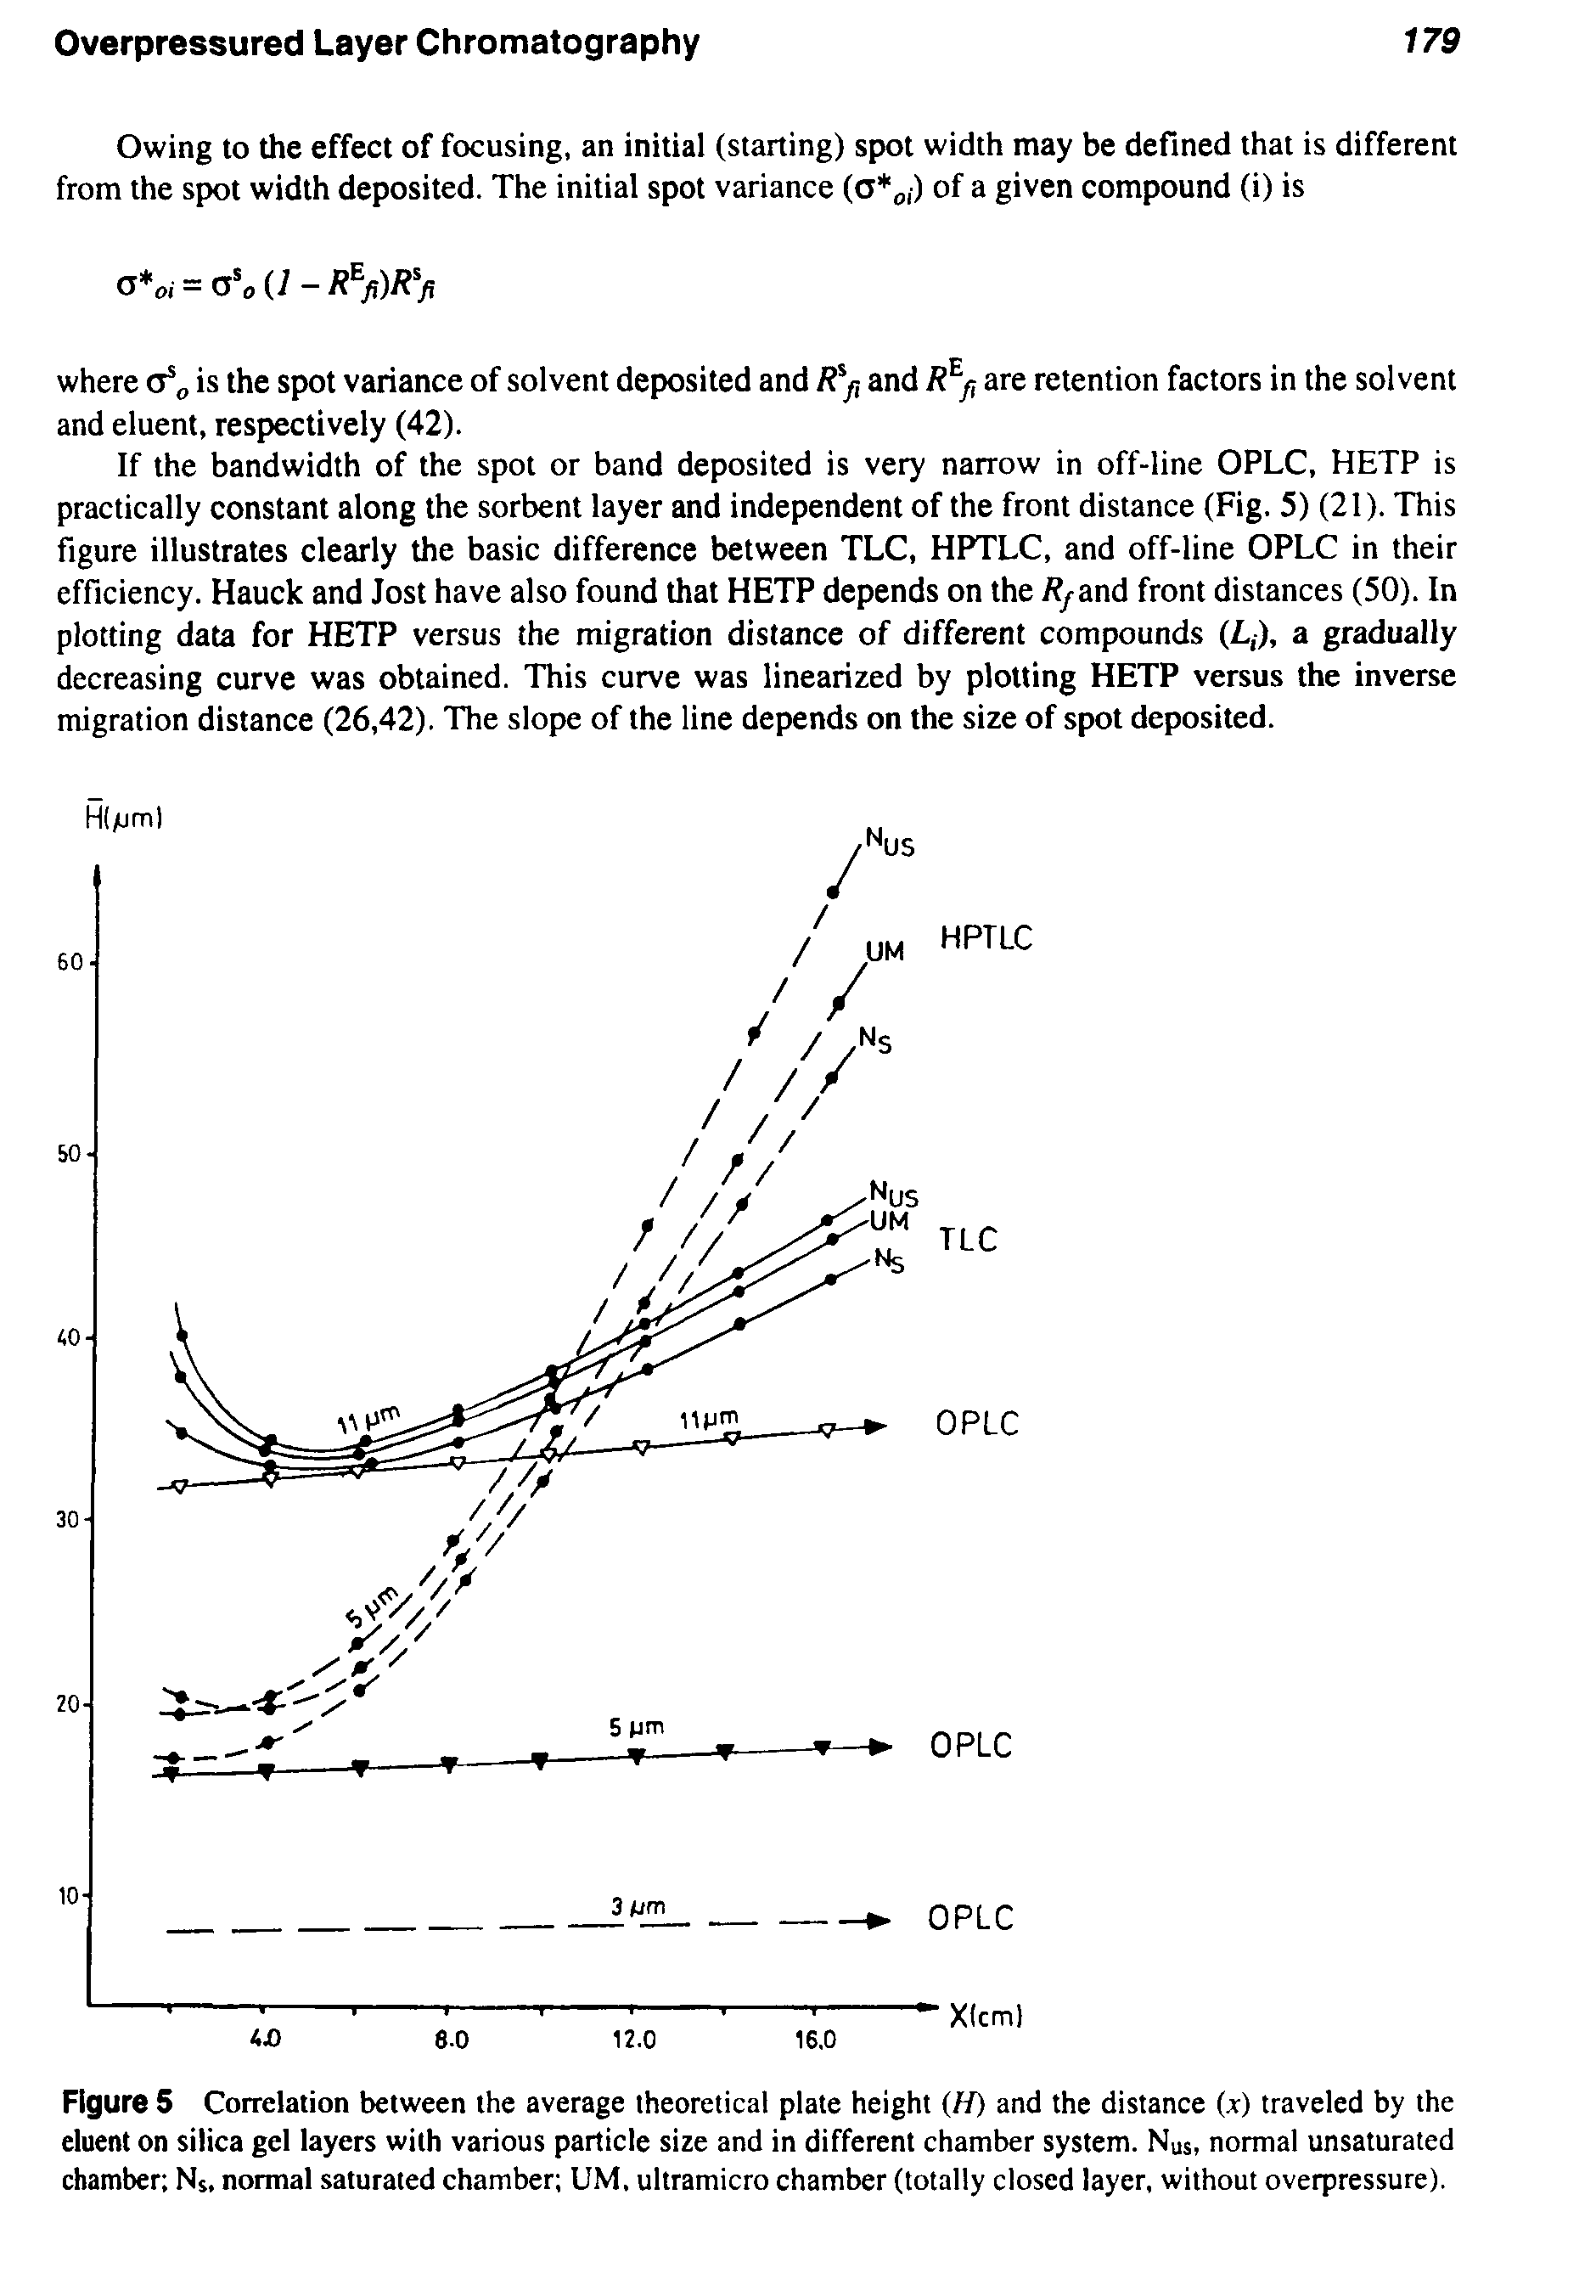 Figure 5 Correlation between the average theoretical plate height (H) and the distance ( c) traveled by the eluent on silica gel layers with various particle size and in different chamber system. Nus, normal unsaturated chamber N, normal saturated chamber UM, ultramicro chamber (totally closed layer, without overpressure).